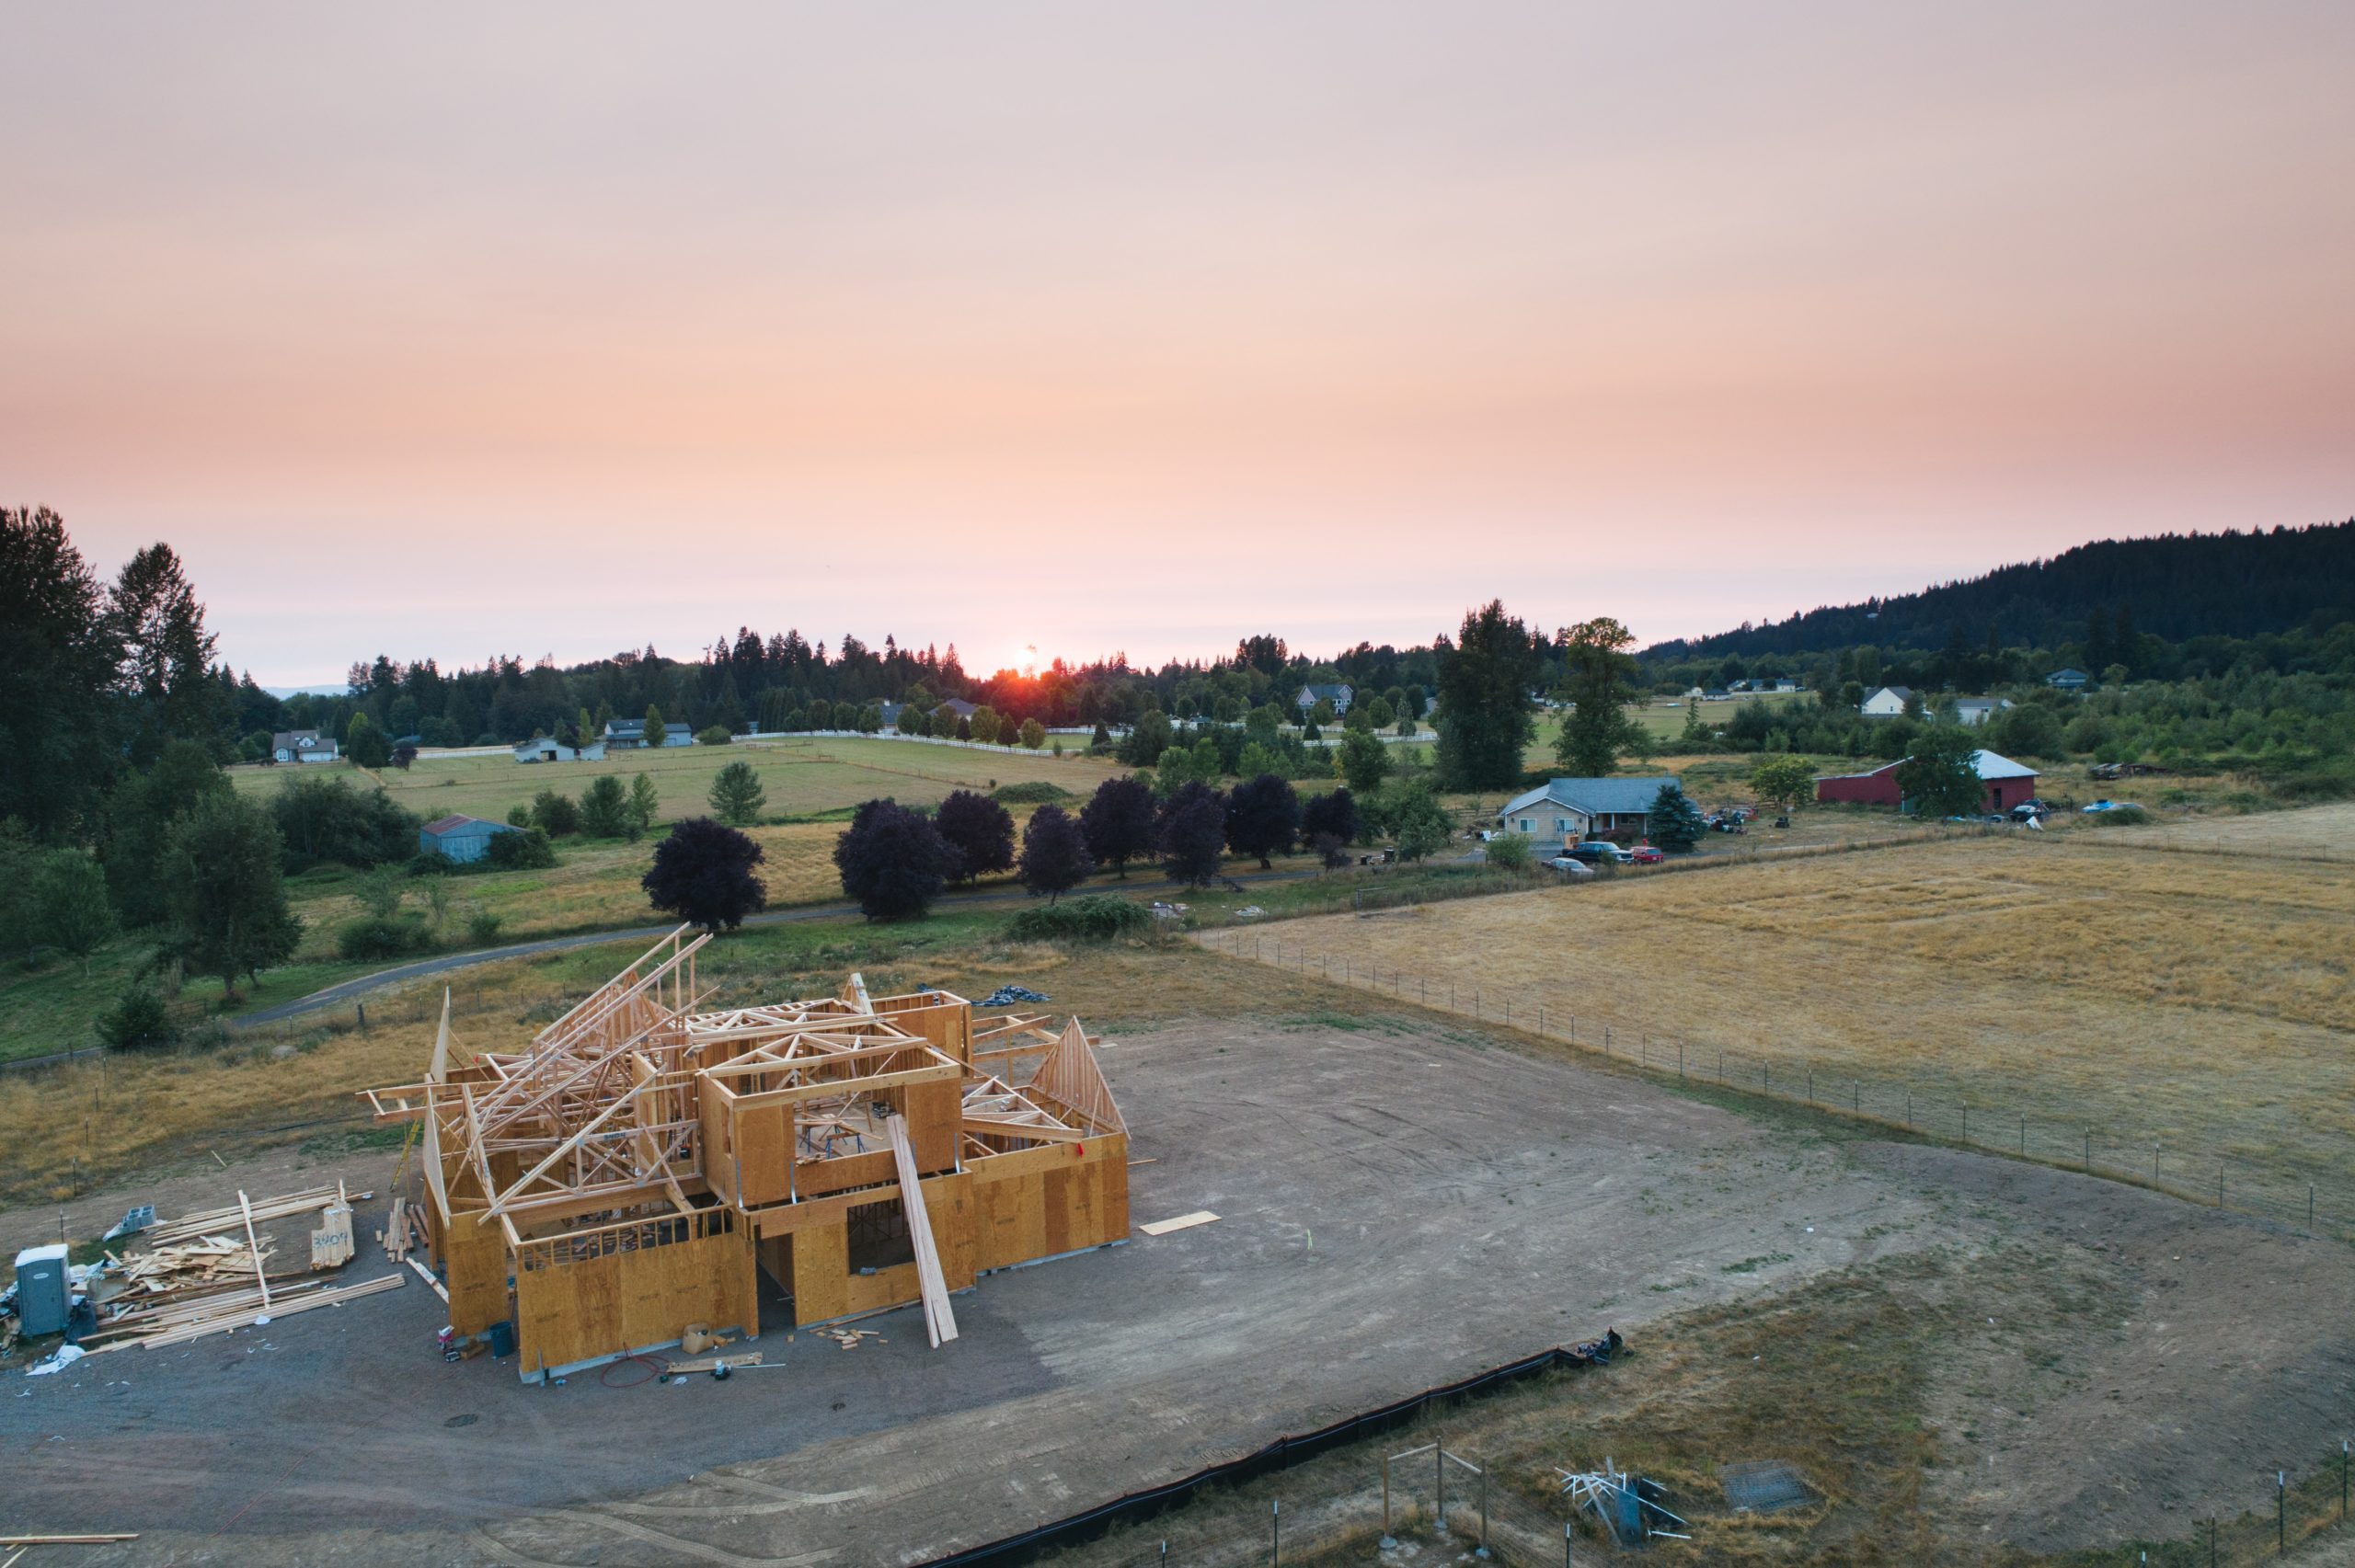 A property building site surrounded by fields and trees during sunset